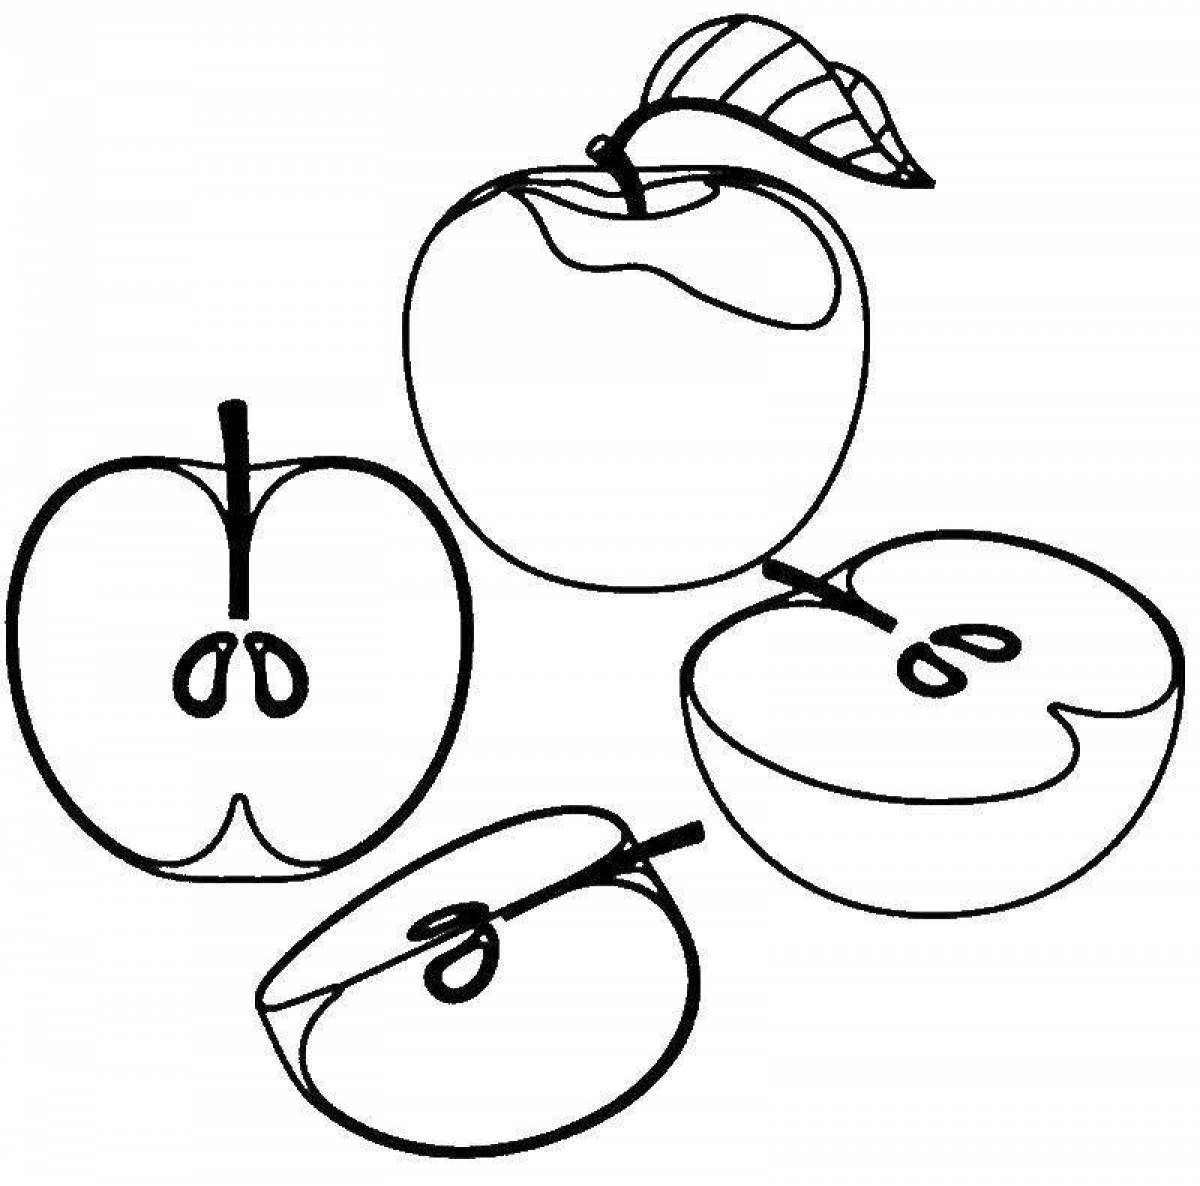 Color-fabulous apple coloring page for kids